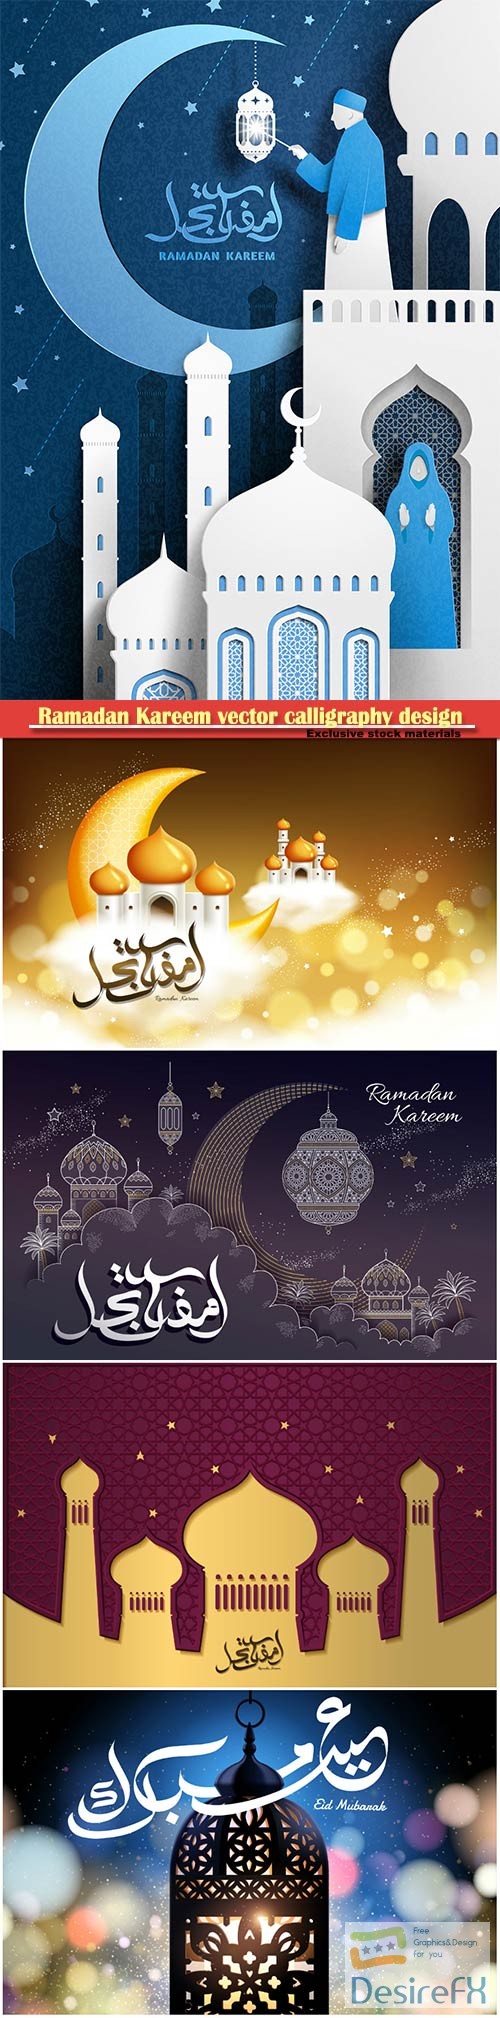 Ramadan Kareem vector calligraphy design with decorative floral pattern,mosque silhouette, crescent and glittering islamic background # 9